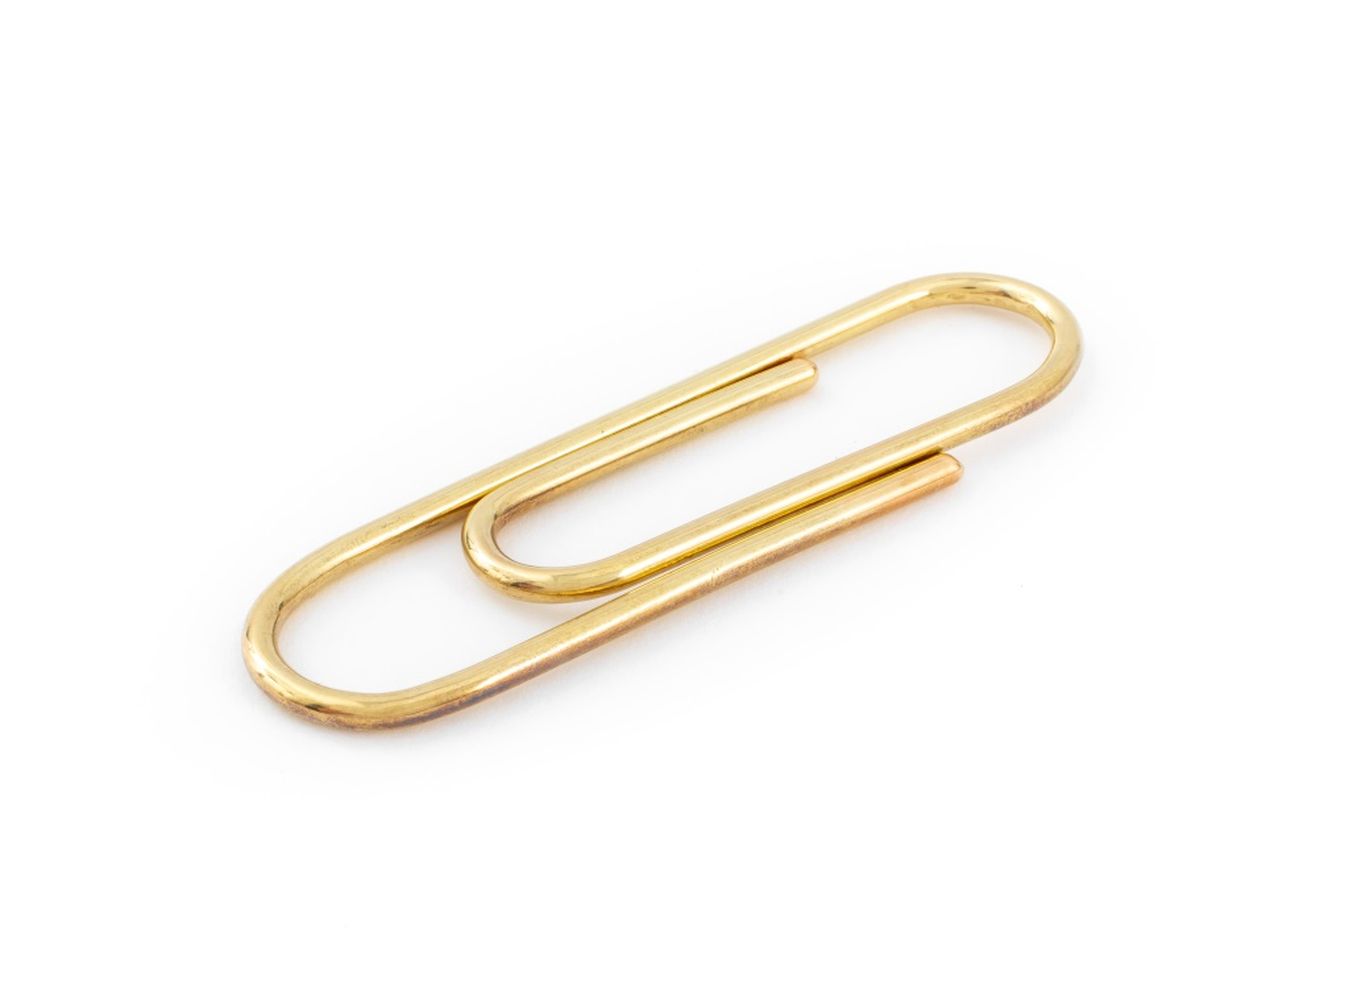 14K YELLOW GOLD PAPERCLIP FORM